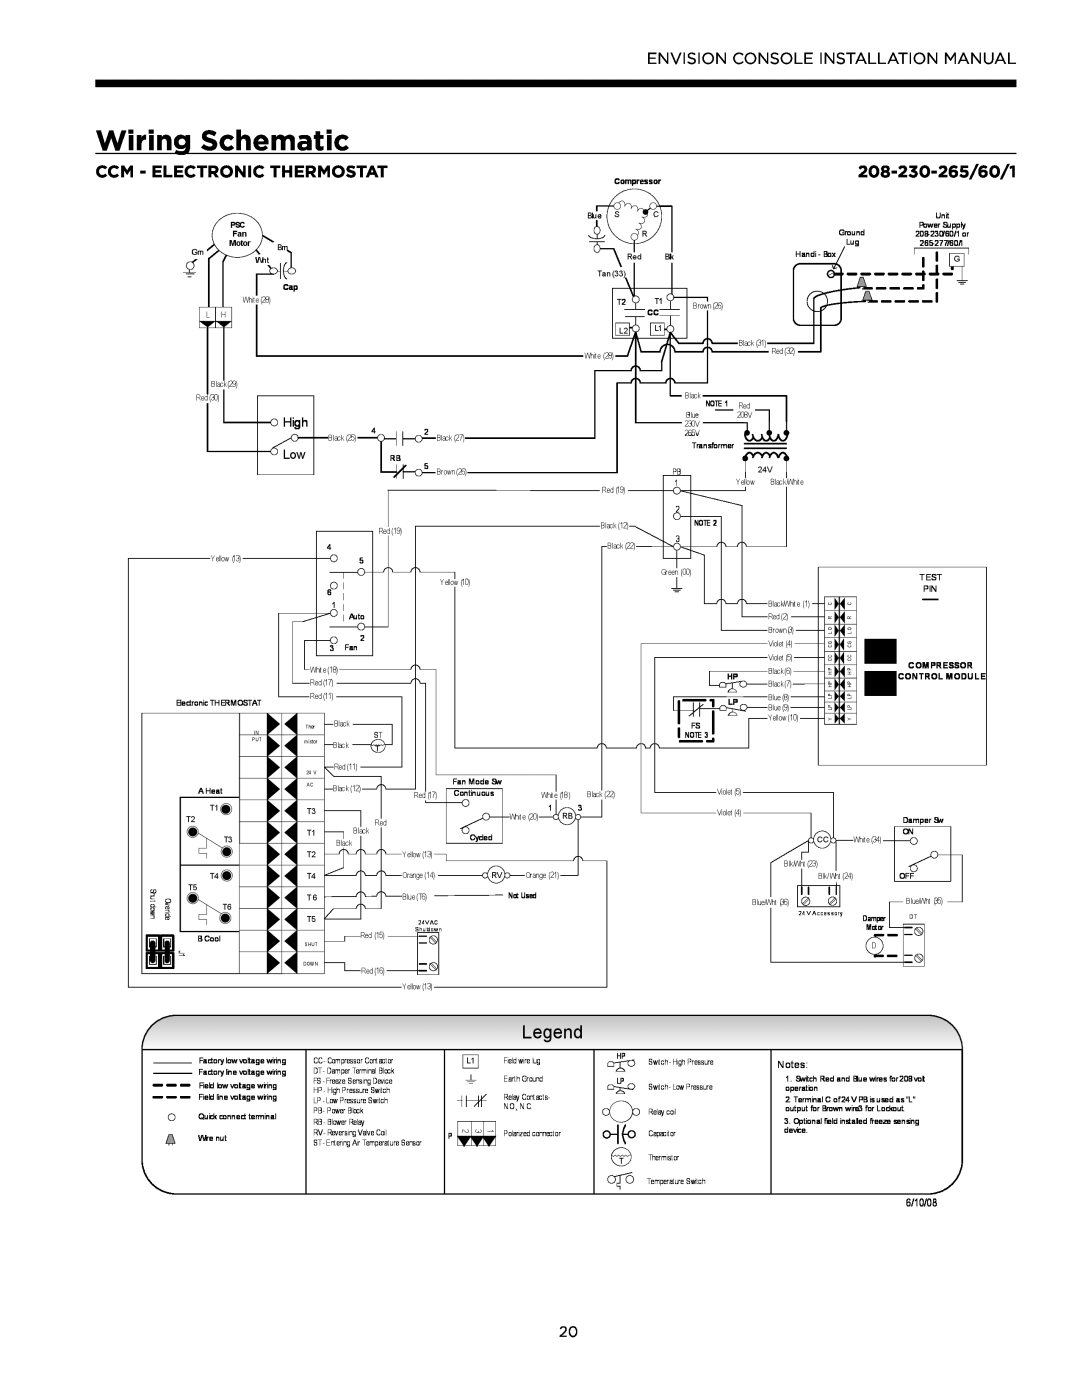 Envision Peripherals IM1609 10 Wiring Schematic, Ccm - Electronic Thermostat, 208-230-265/60/1, Compressor, Control Module 